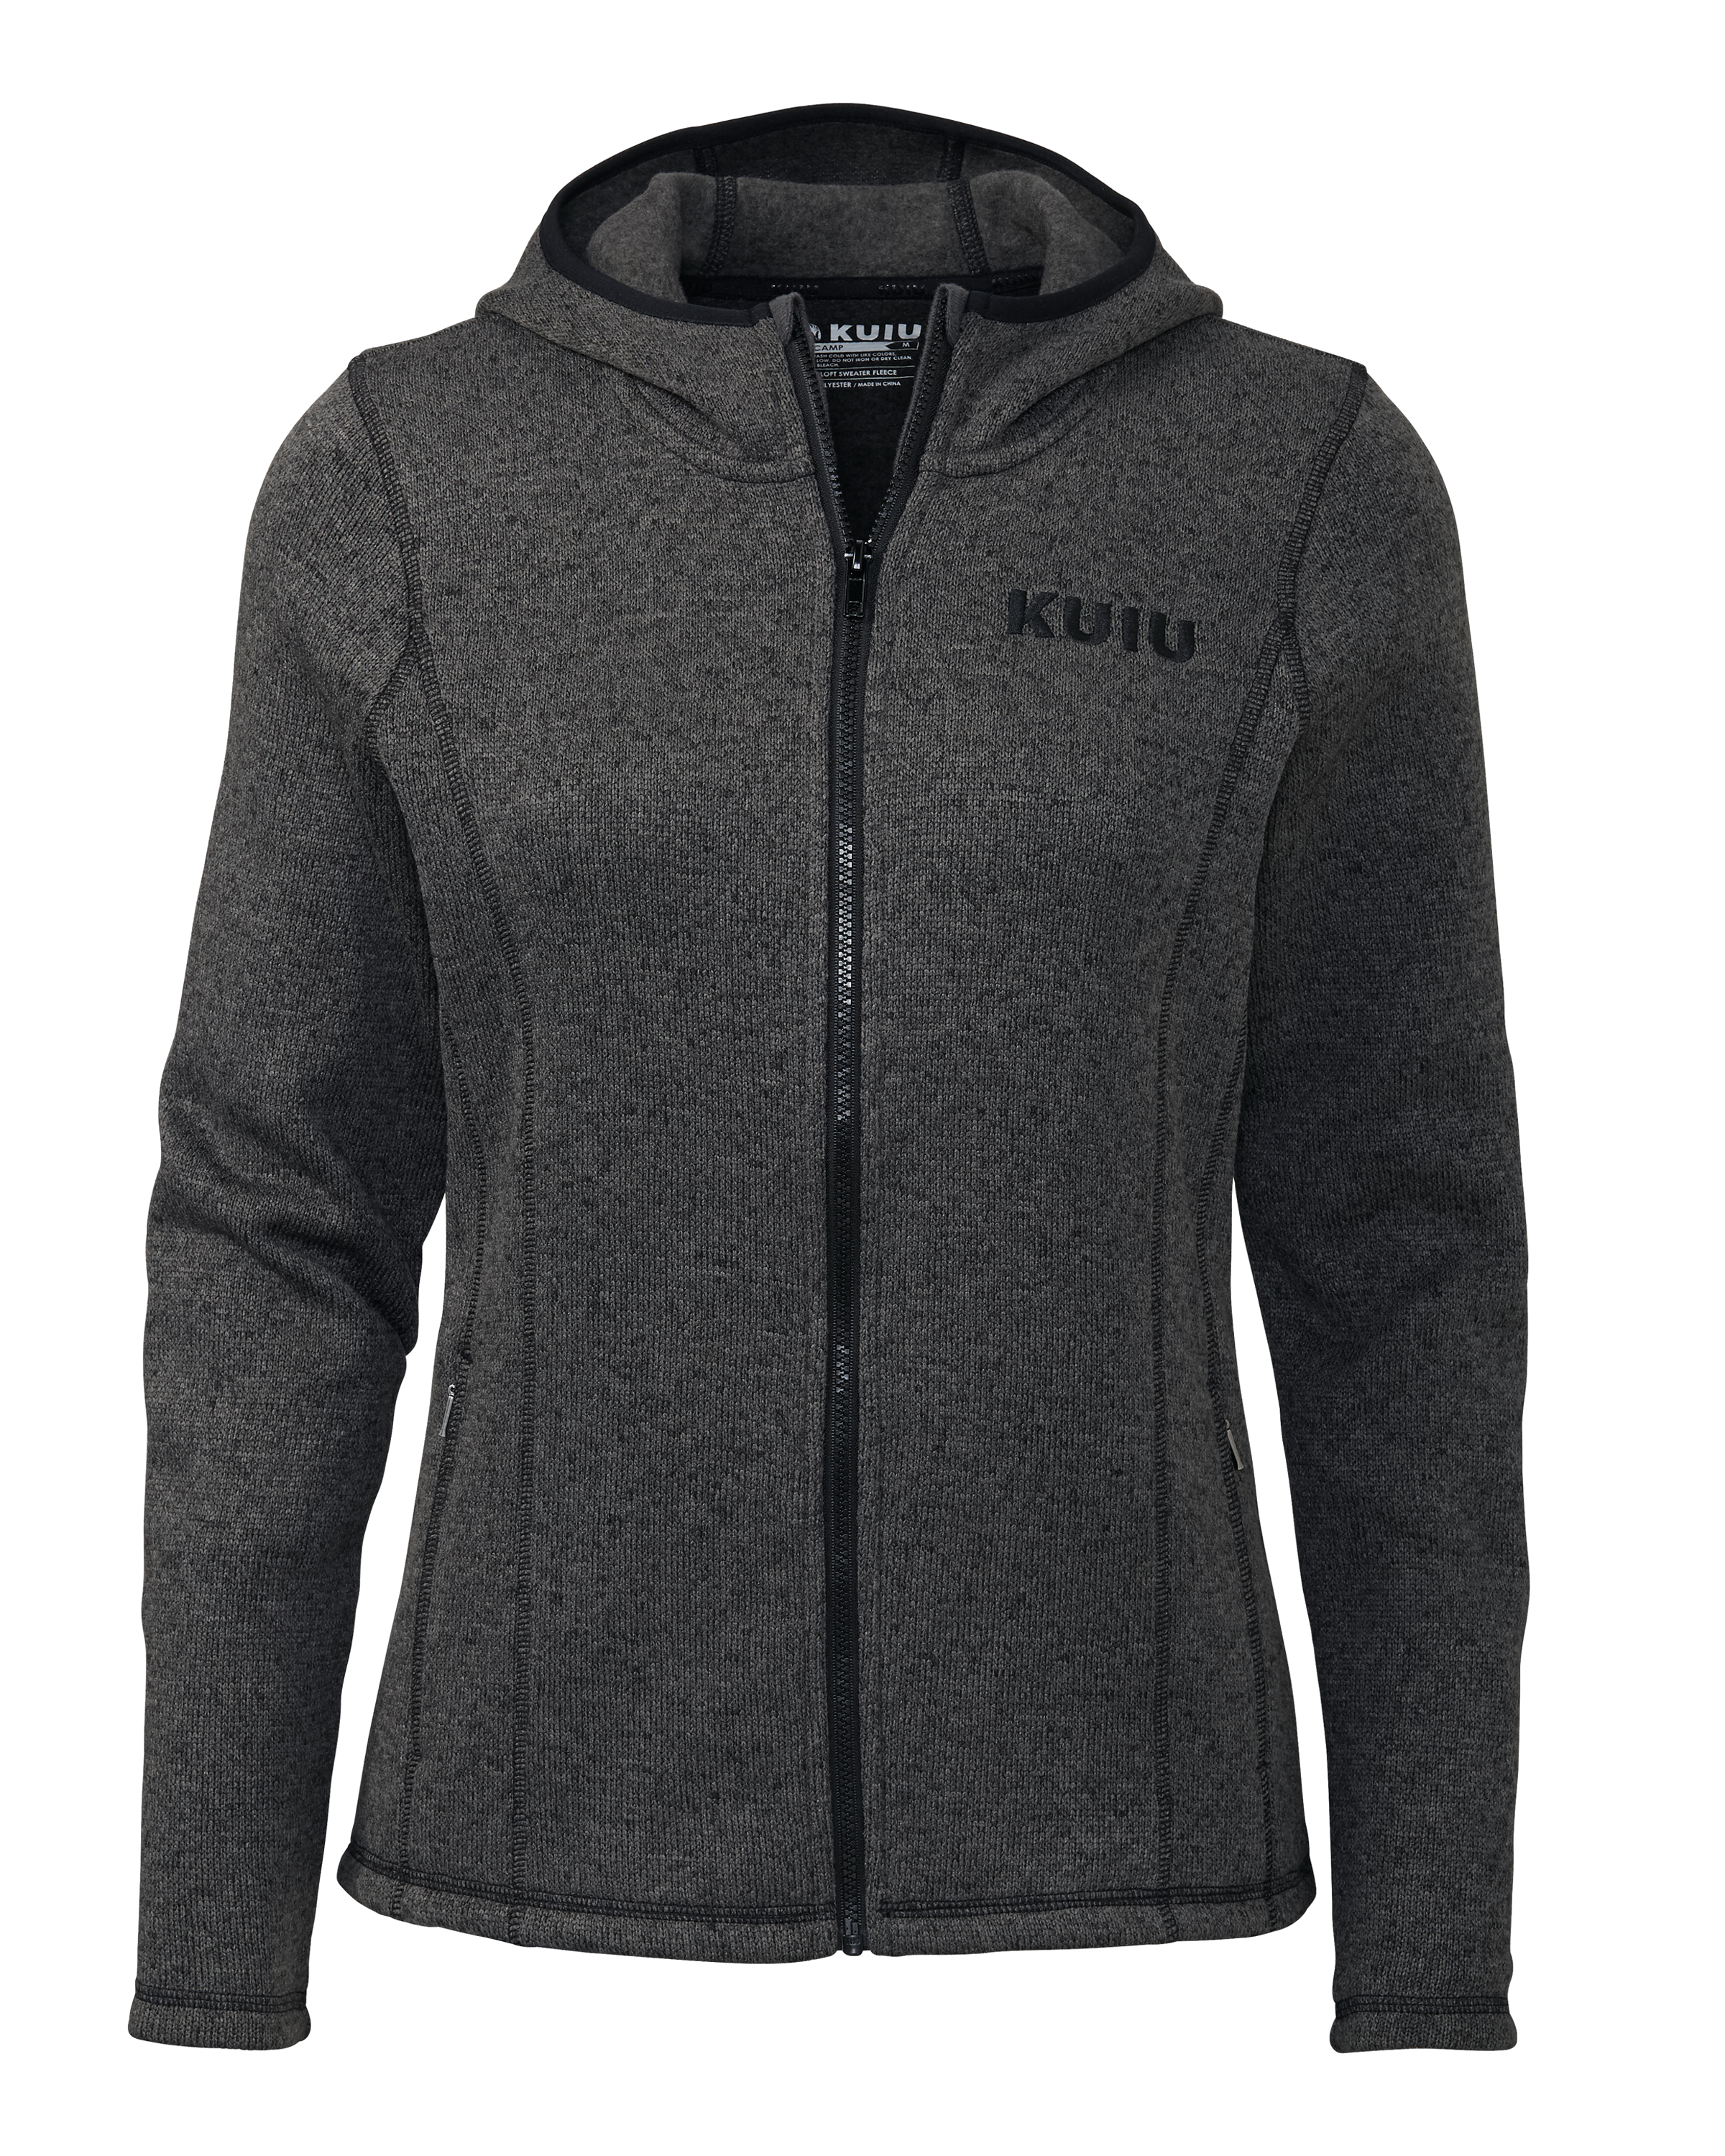 KUIU Outlet Women's Base Camp Hooded Sweater in Charcoal | Size XL